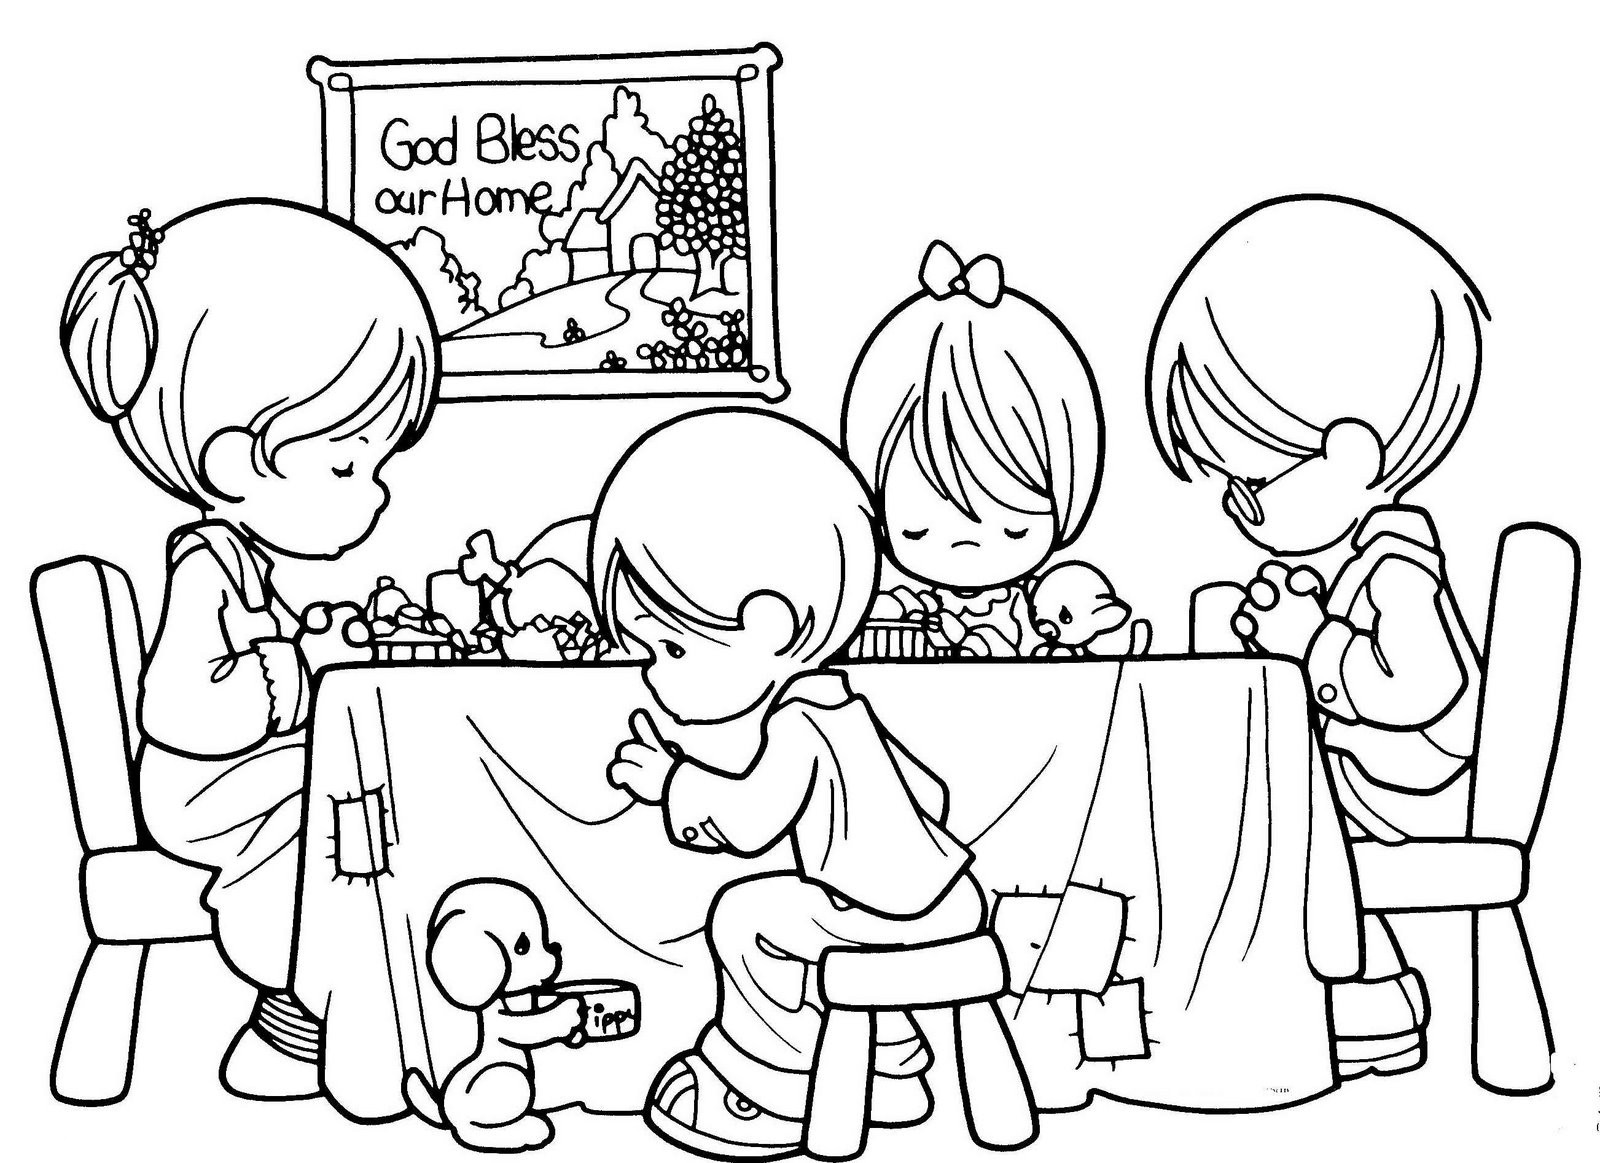 Christian Kids Coloring Pages
 Free Printable Christian Coloring Pages for Kids Best